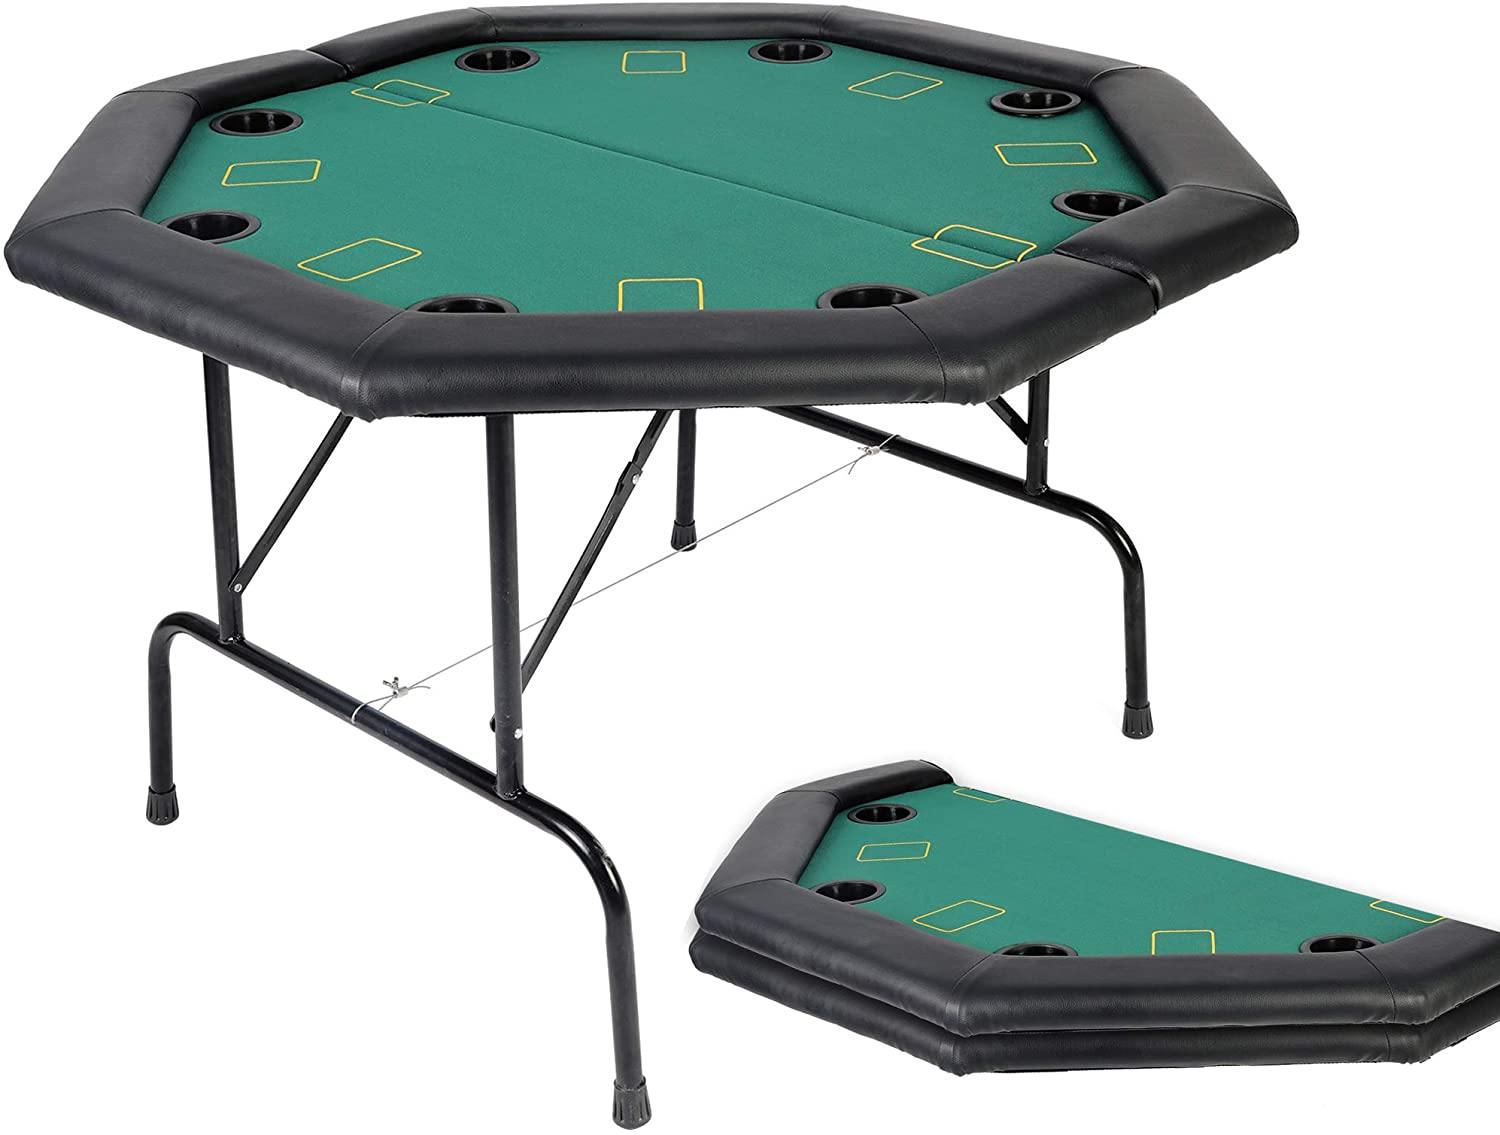 Folding Texas Poker Table Top Casino Game for 8 Players, Green - Bosonshop